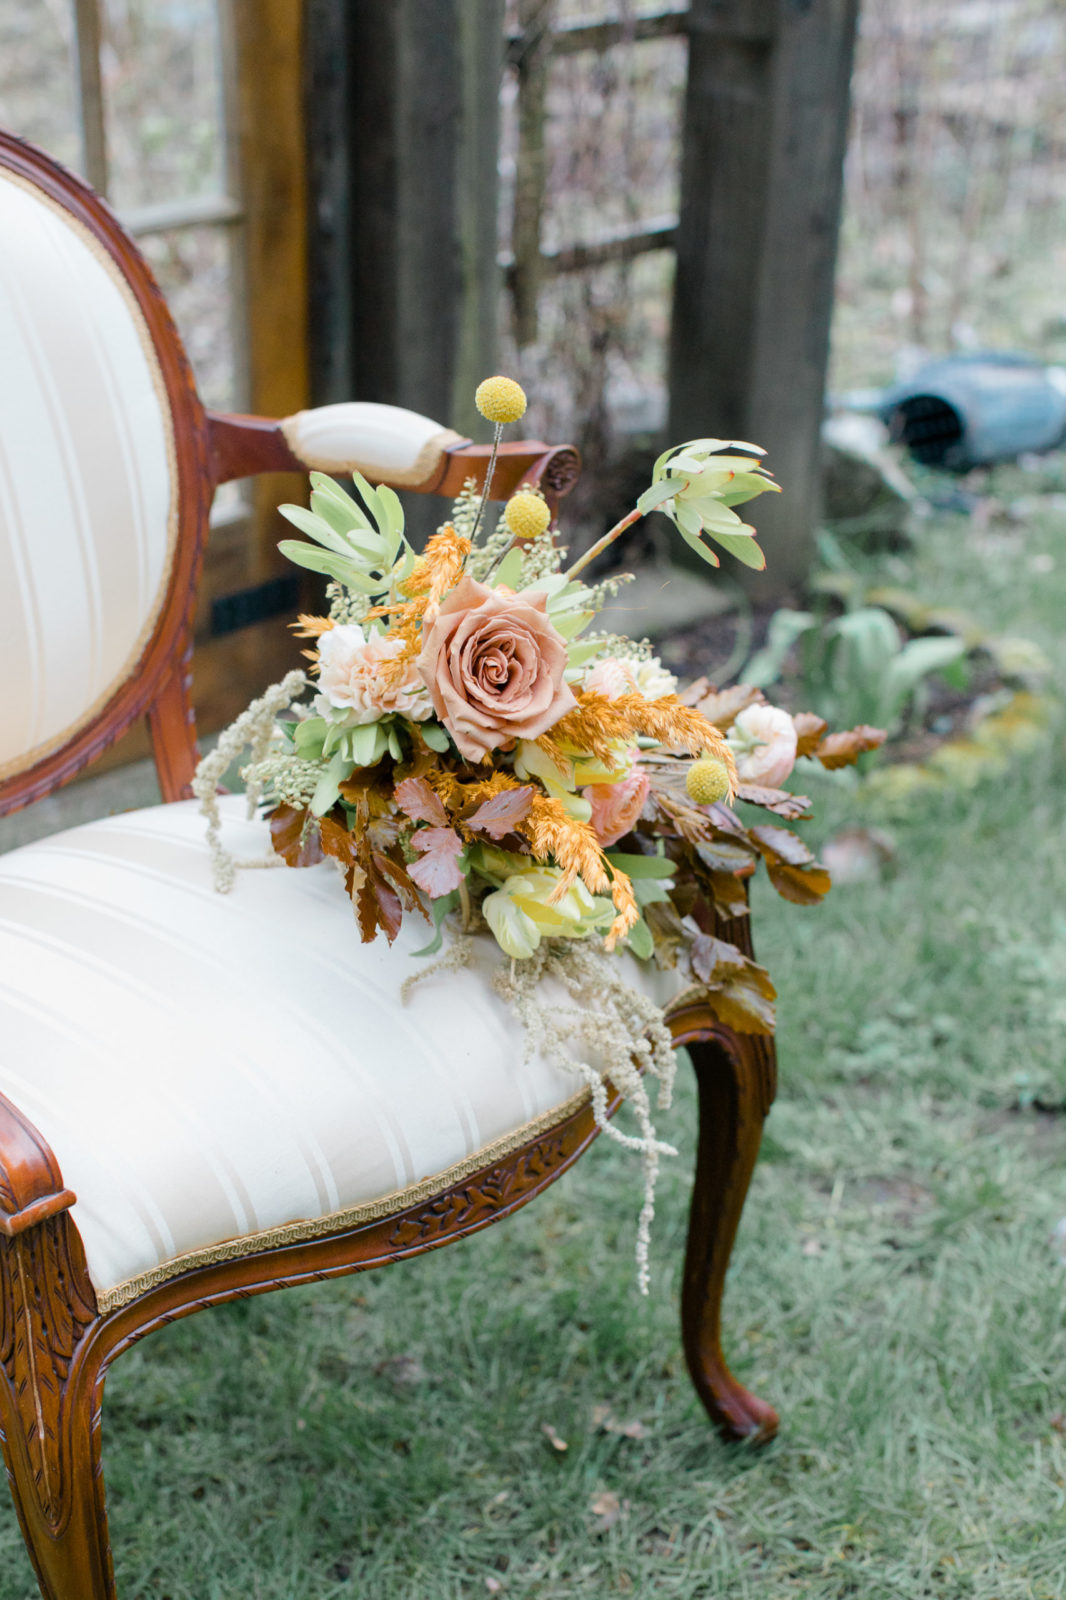 Greenhouse wedding inspiration, location: Abbotsford BC, whimsical, vintage meets modern, fall wedding inspiration, wedding seating